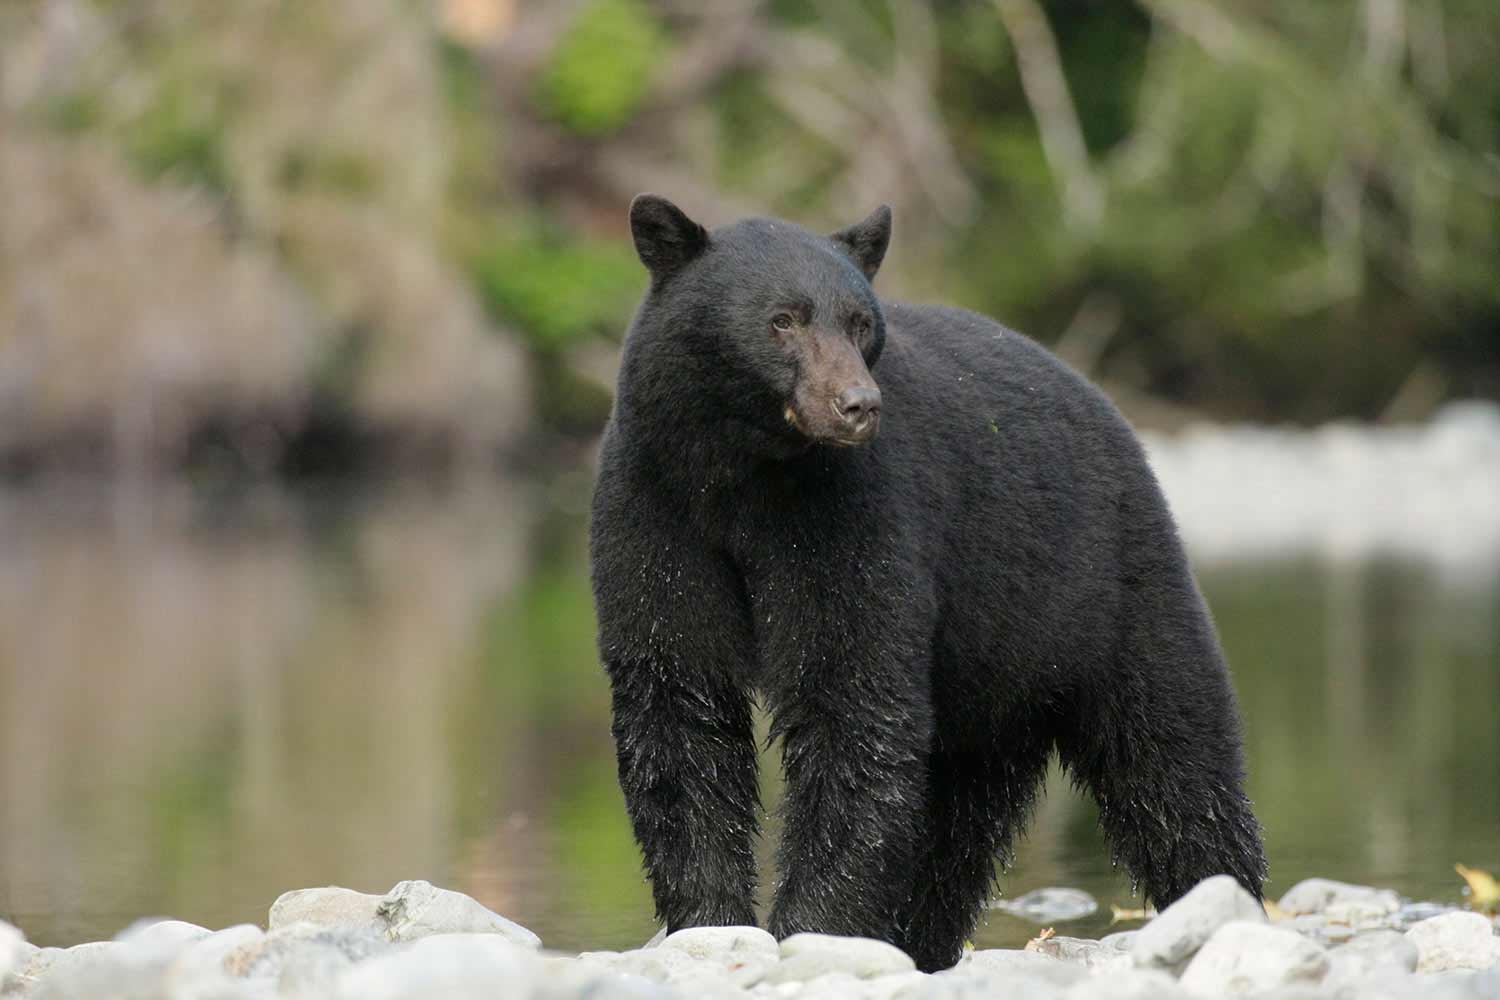 A black bear looking over his surroundings.